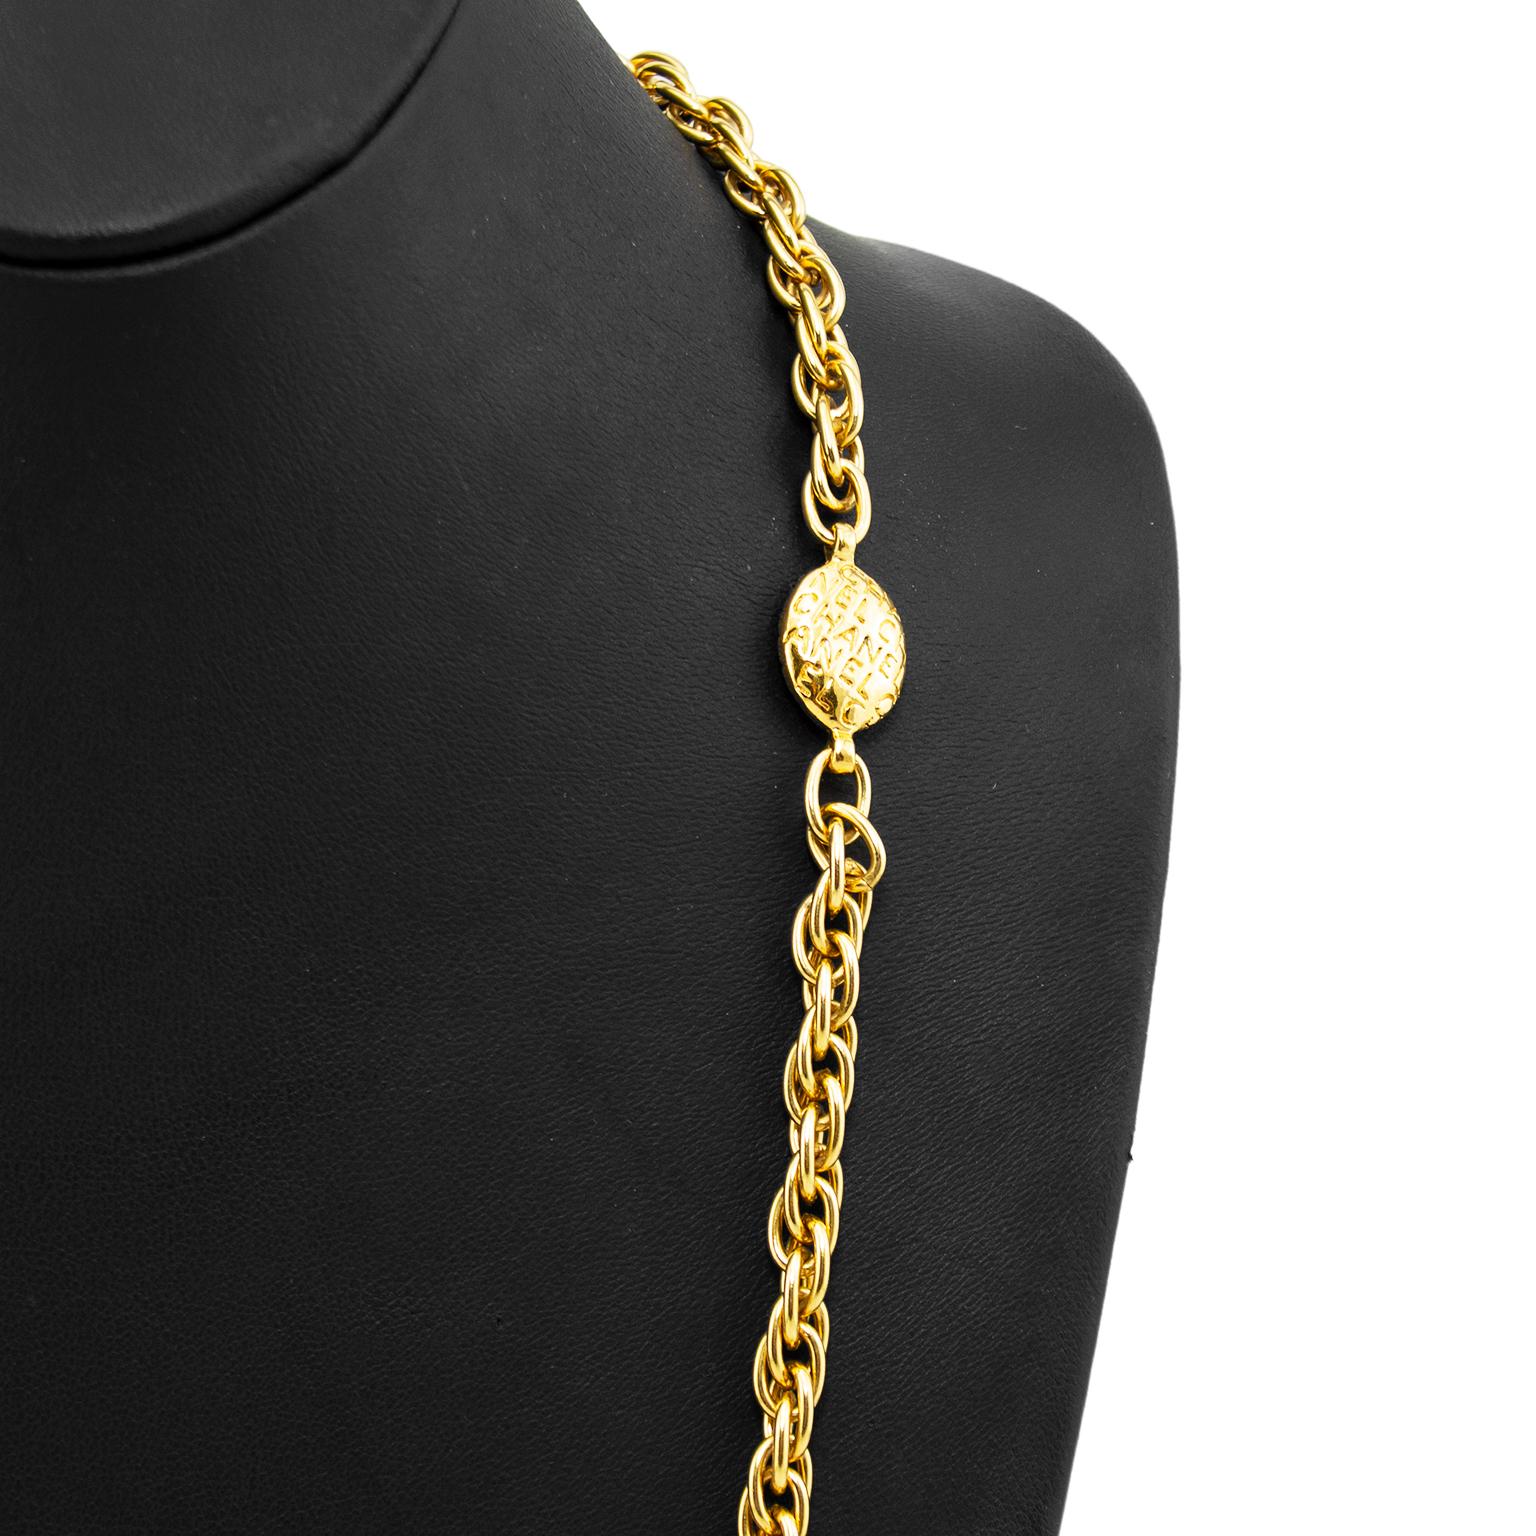 1980s Chanel Single Chain Necklace with Oval Engraved Links  In Good Condition For Sale In Toronto, Ontario